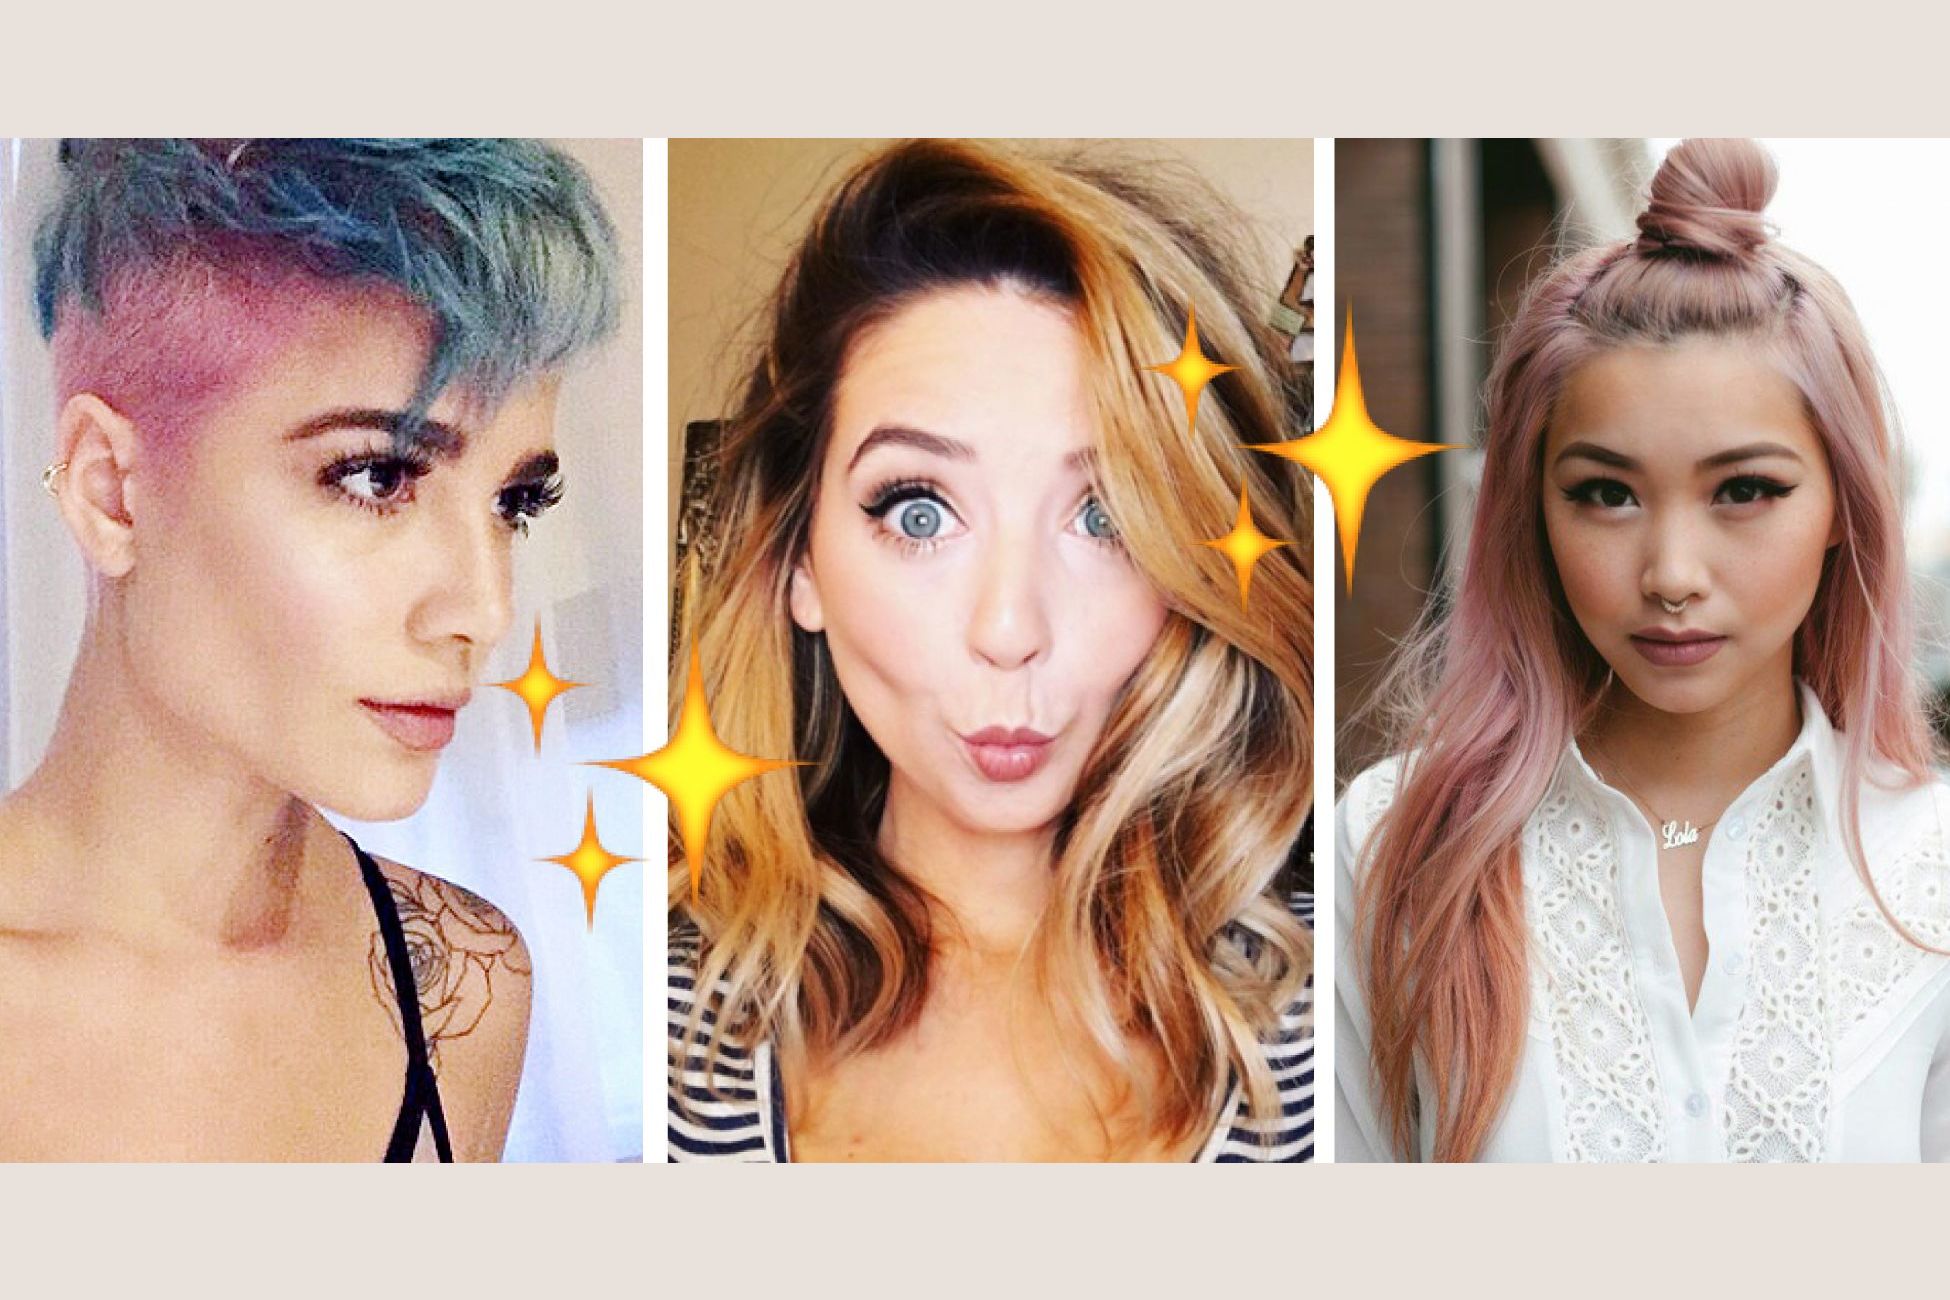 which hairstyle should you try based on your zodiac sign?